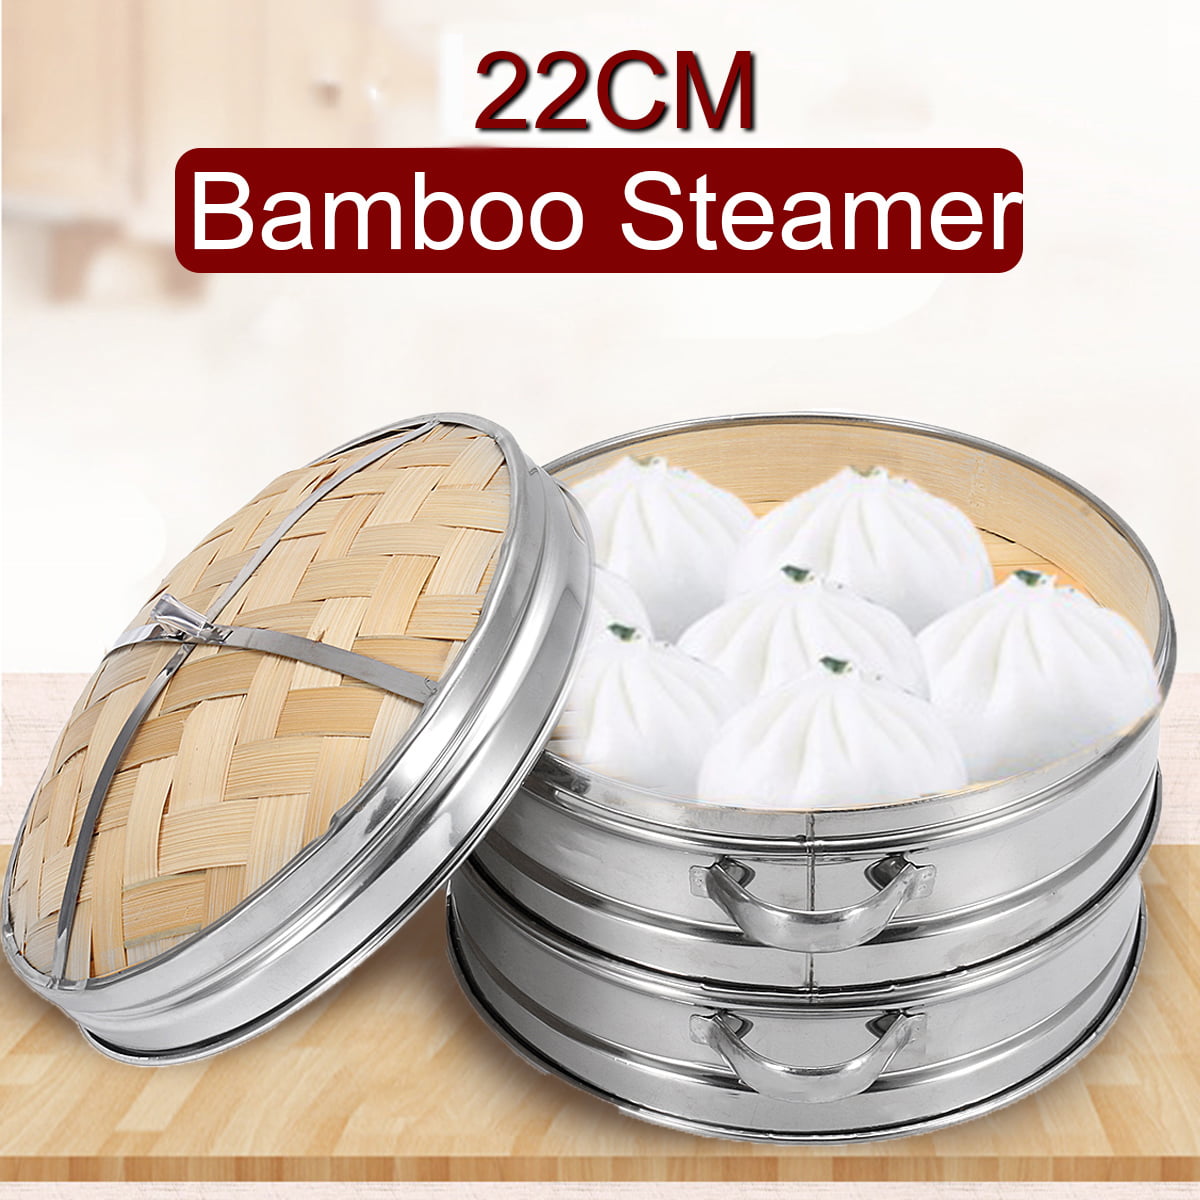 2 Tiers Bamboo Steamer Kitchen Cookware Basket Cooker Set Stainless Steel 22cm 